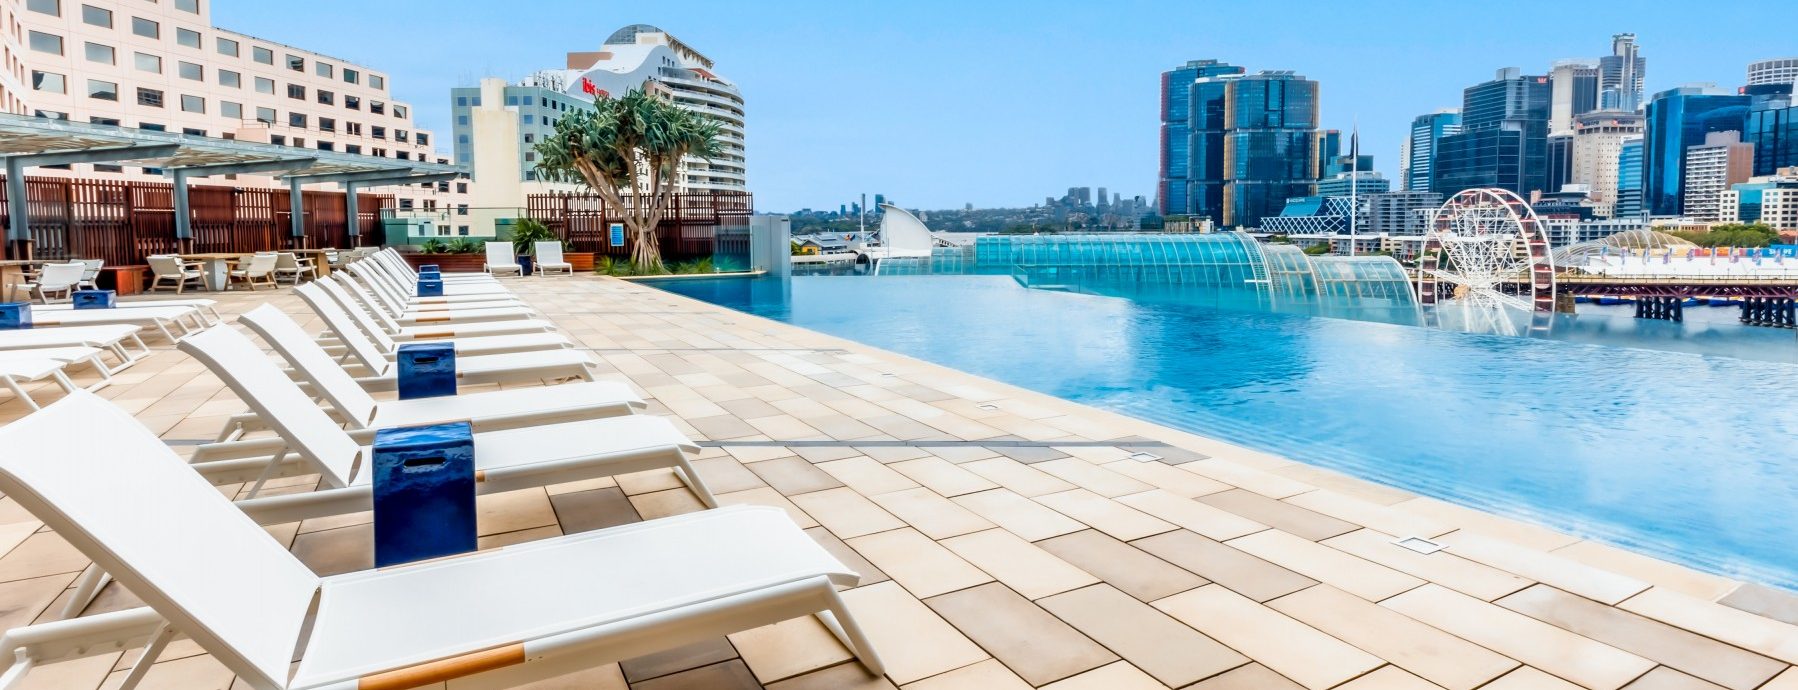 sofitel-sydney-darling-harbour-le-rivage-infinity-pool